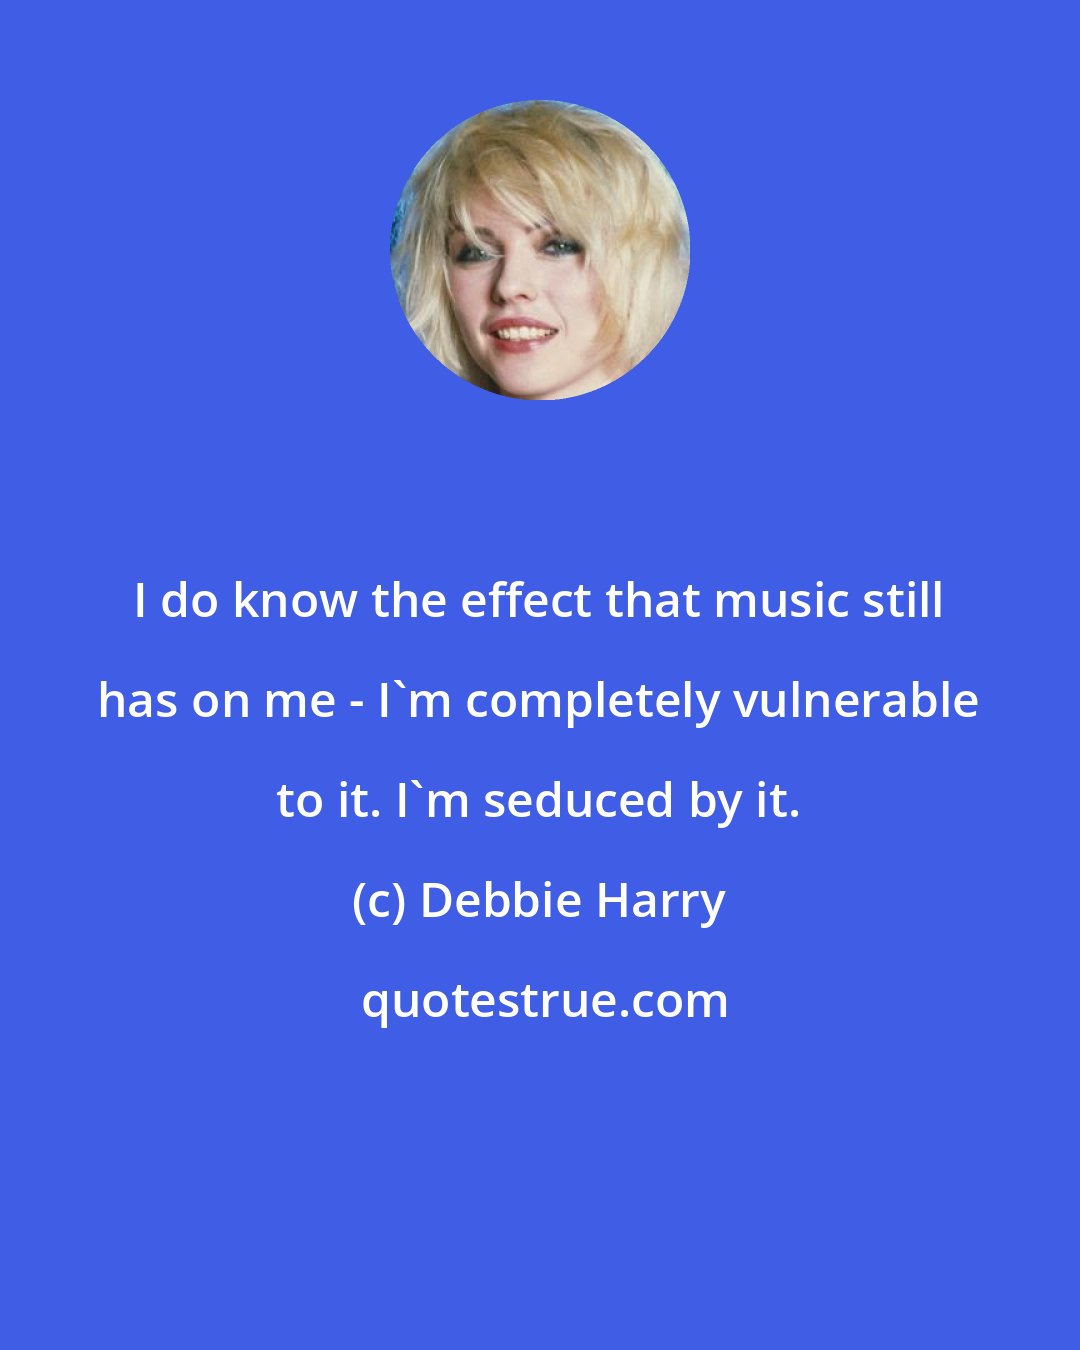 Debbie Harry: I do know the effect that music still has on me - I'm completely vulnerable to it. I'm seduced by it.